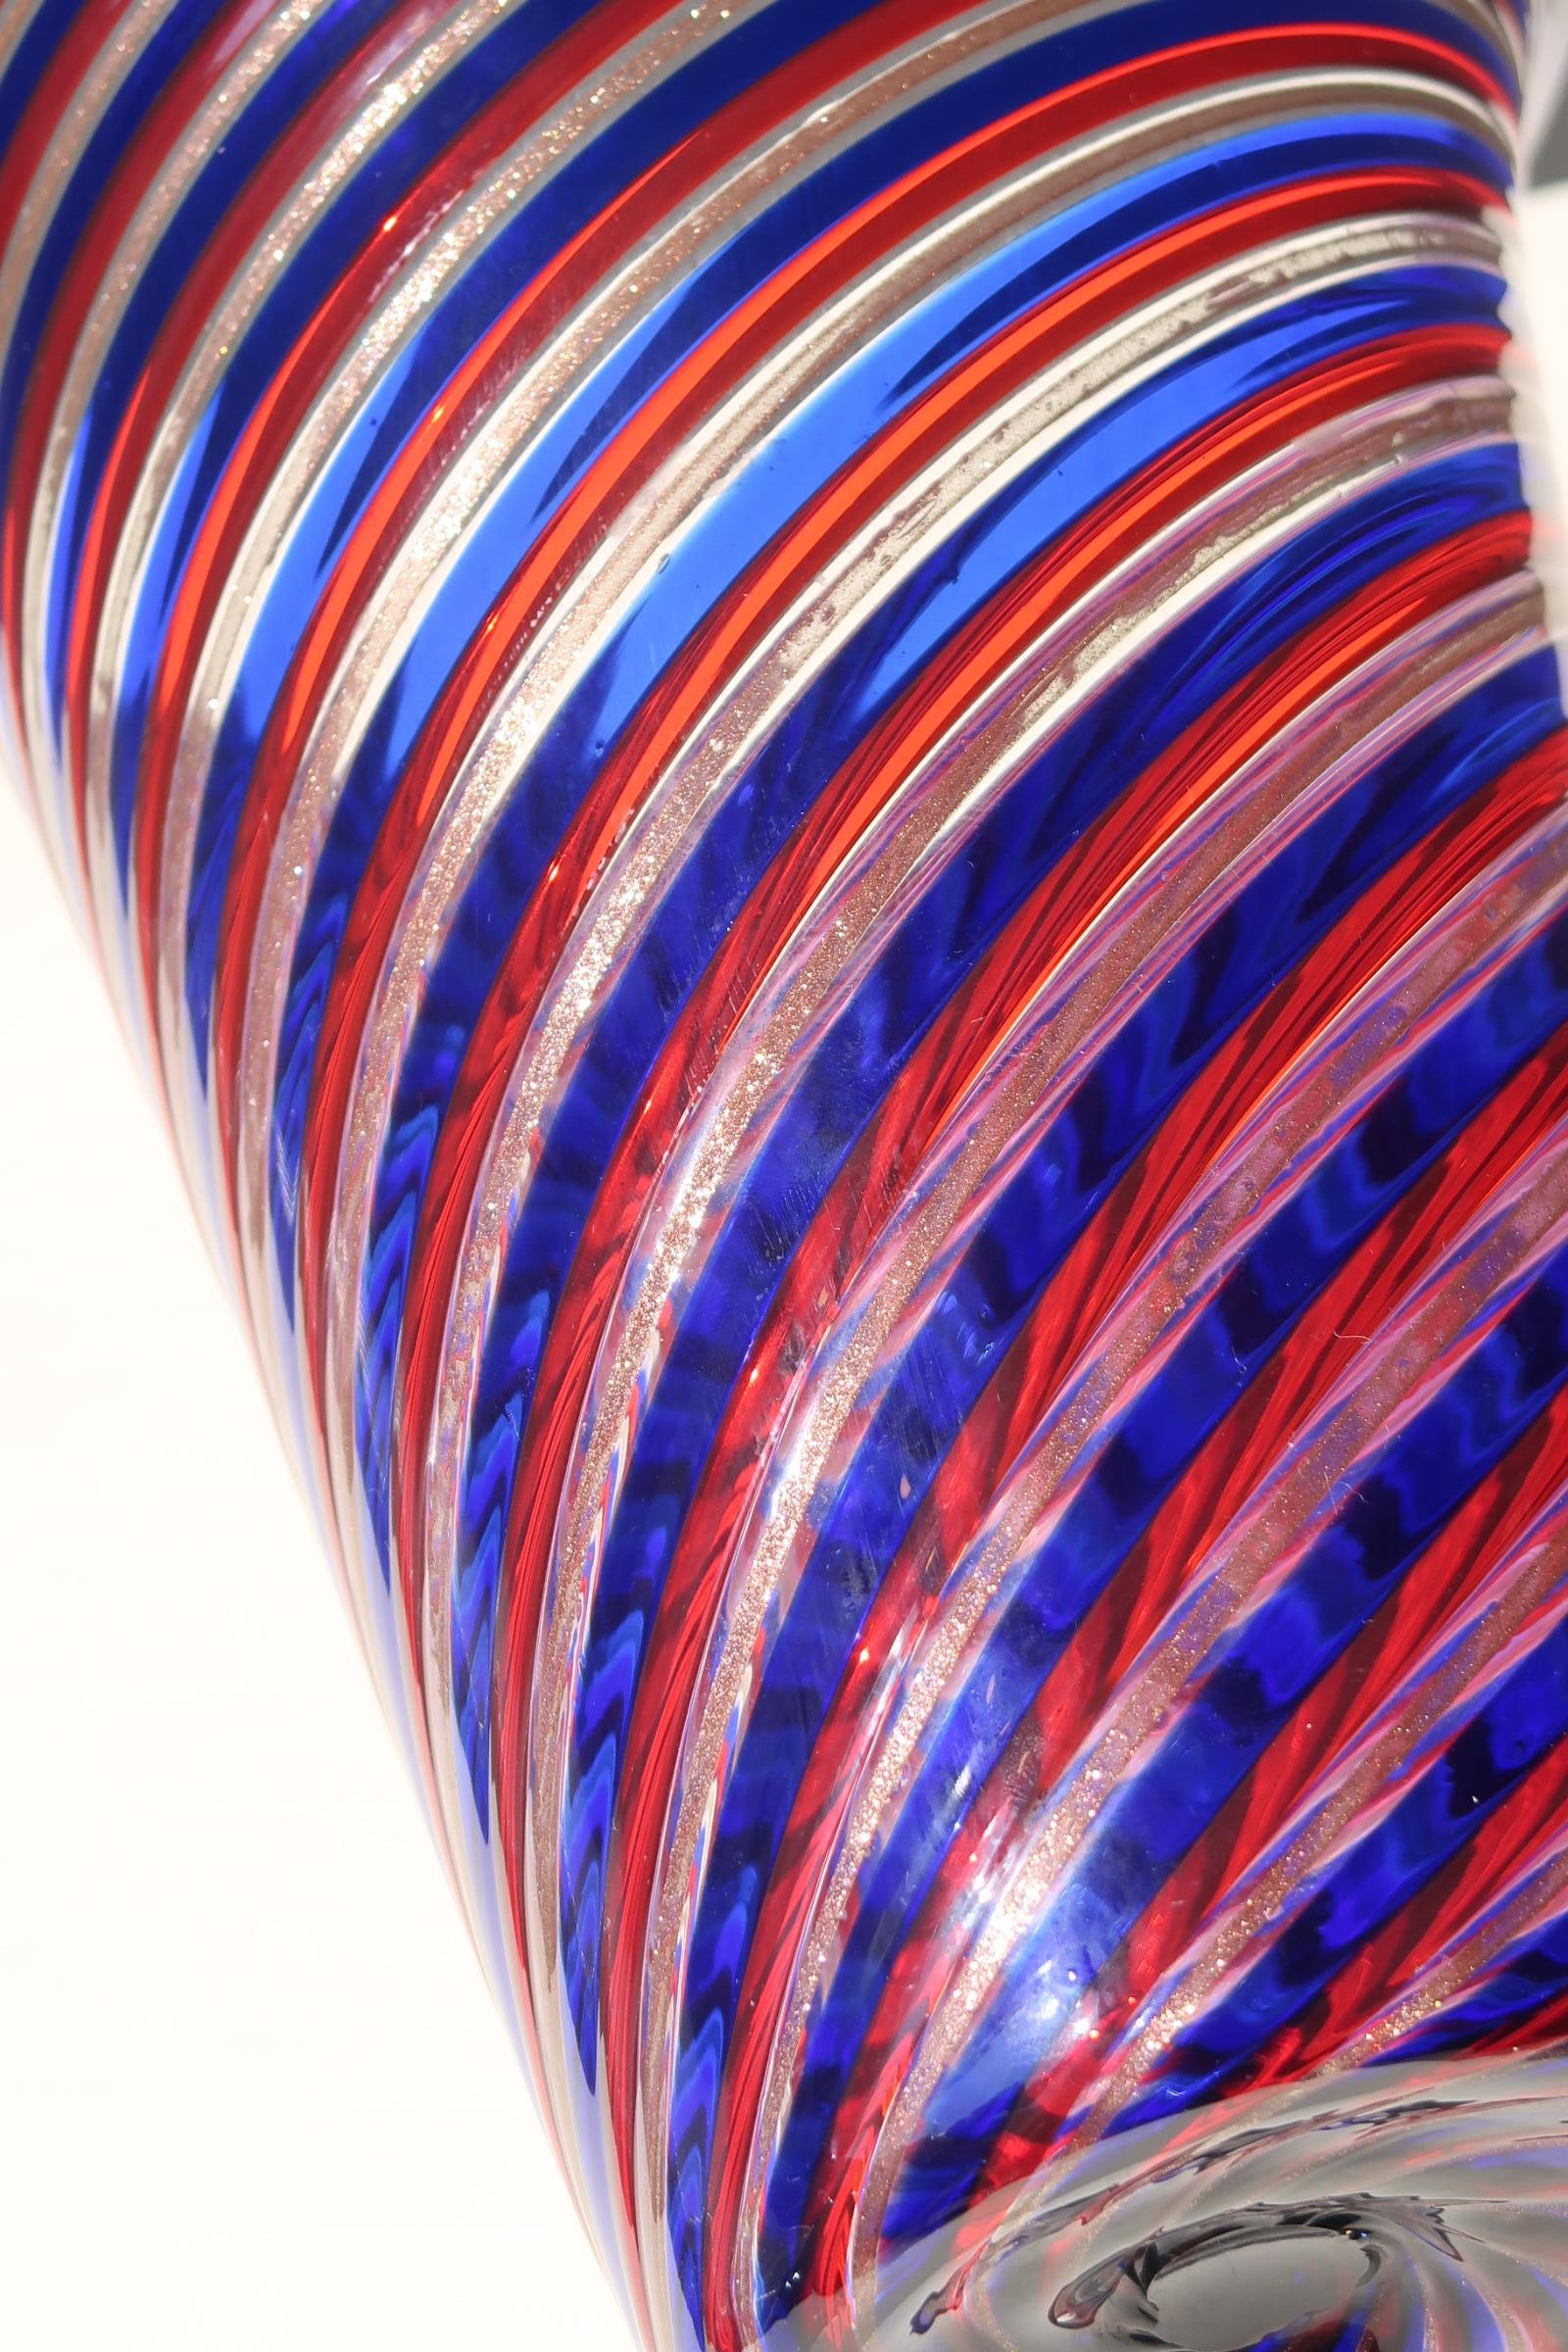 Unusual large vintage Murano A Canne Filigrana vase with lid in deep shades of red, blue and copper. Mouth-blown glass in a technique known primarily from the glass houses Venini, Gio Ponti and Fratelli Toso. Handmade in Italy, 1970s.
H:26.5cm